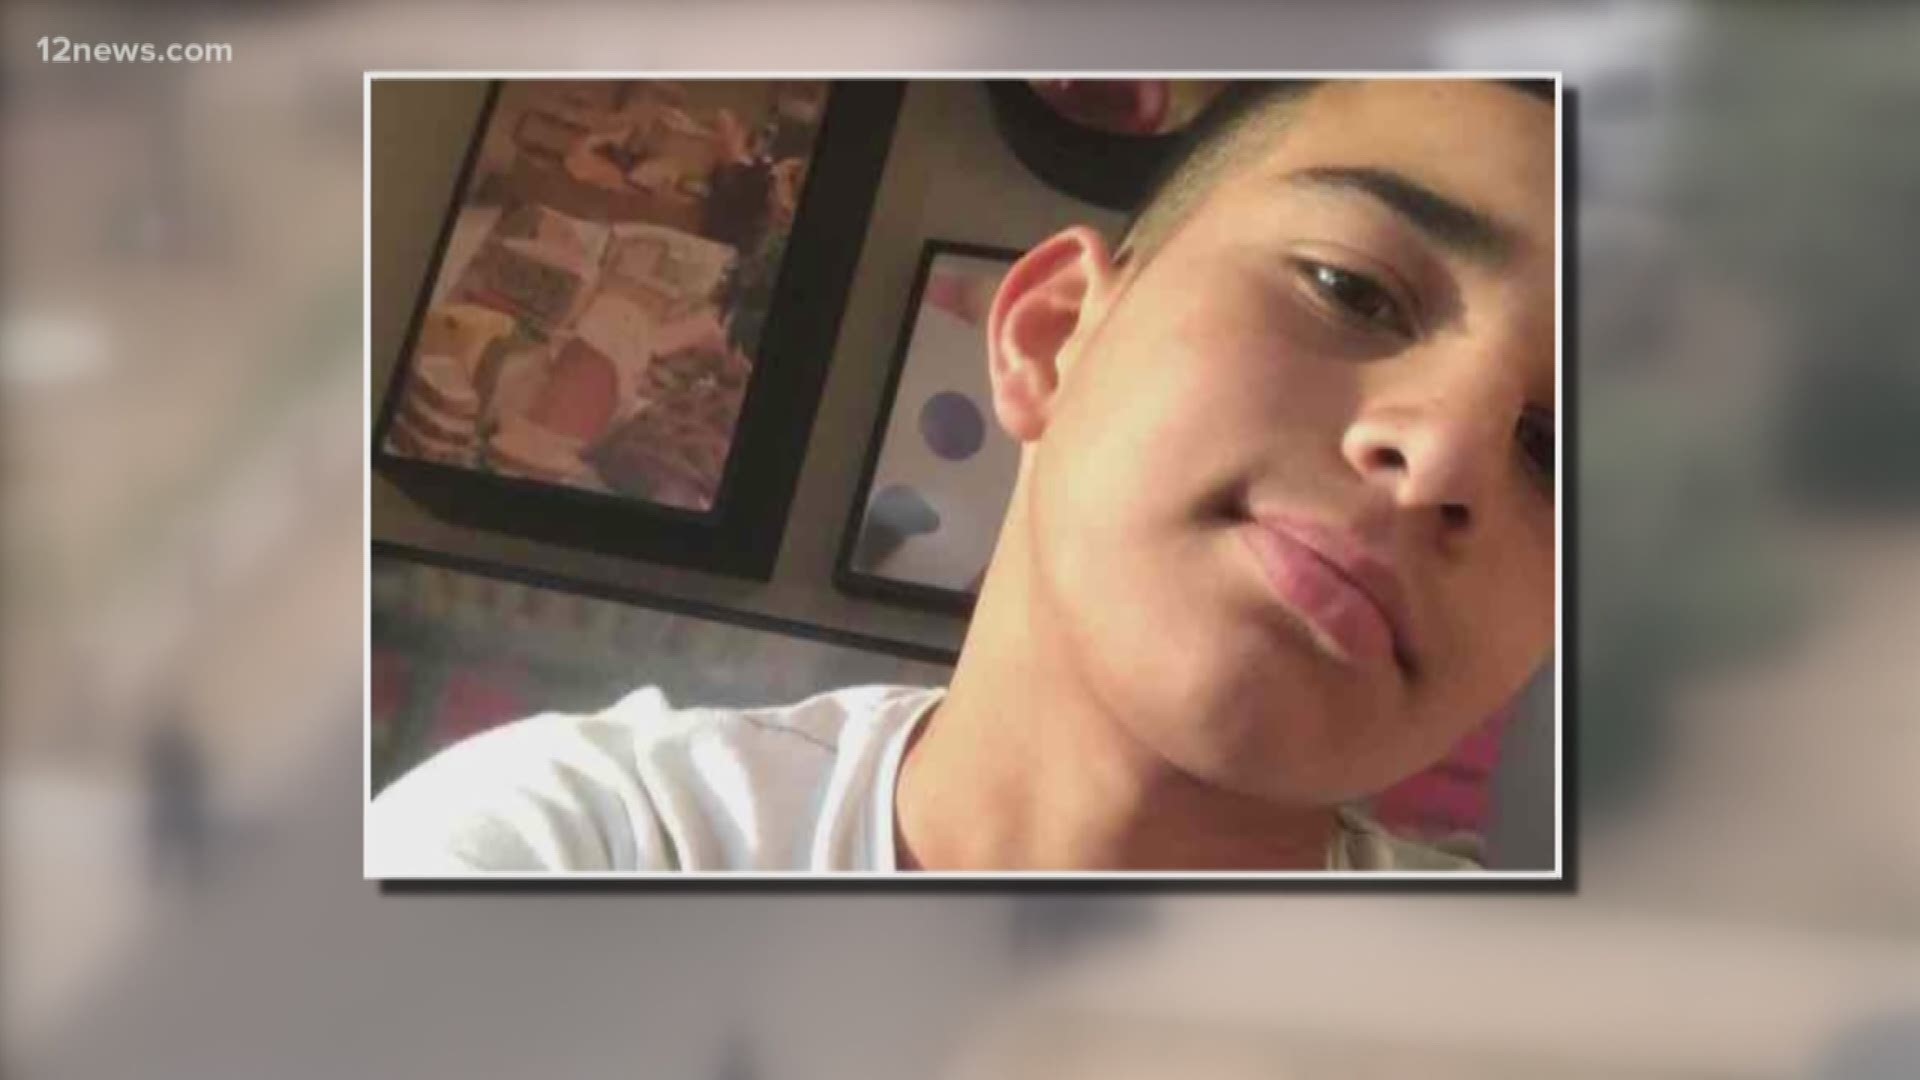 Antonio Arce was shot and killed by a Tempe police officer responding to a burglary in progress. New video, not released to the public of shown to the family, is sparking protests from Arce's family members.